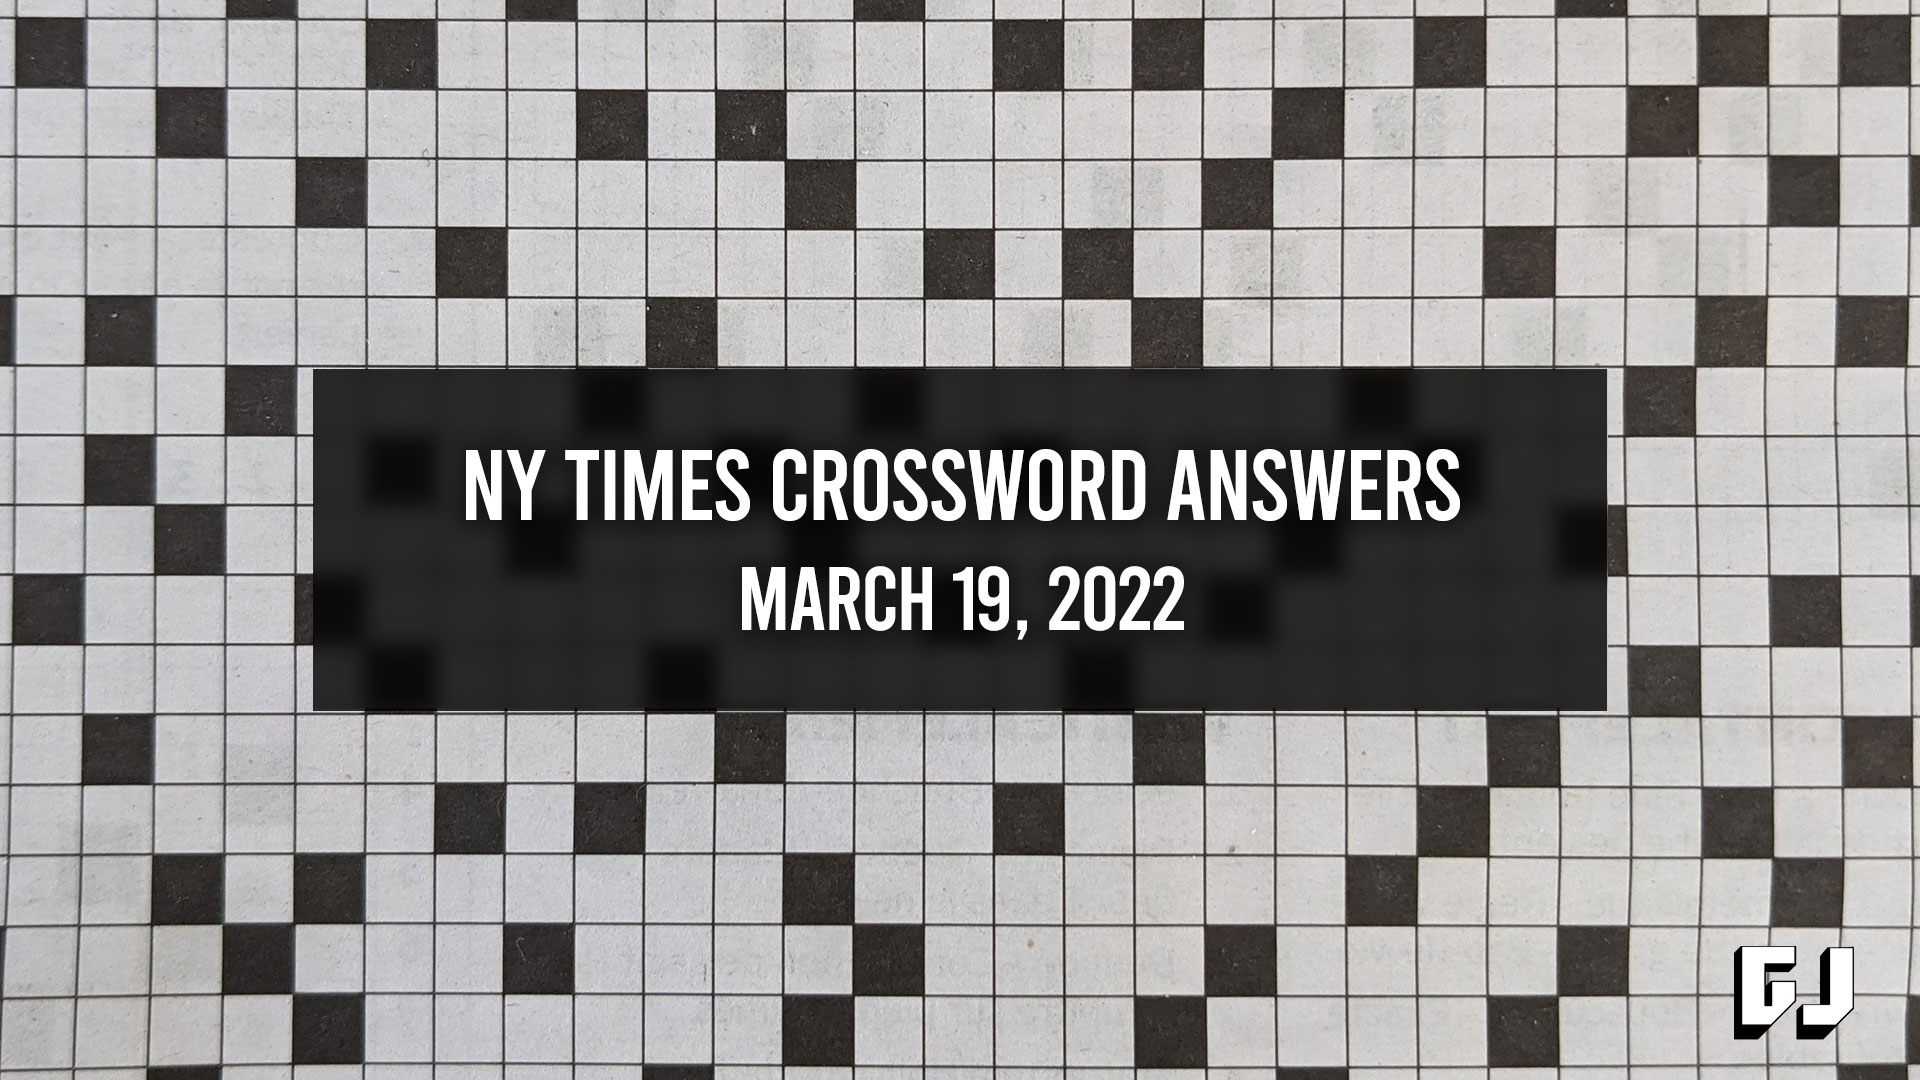 NYT Crossword Answers for March 19, 2022 - Gamer Journalist